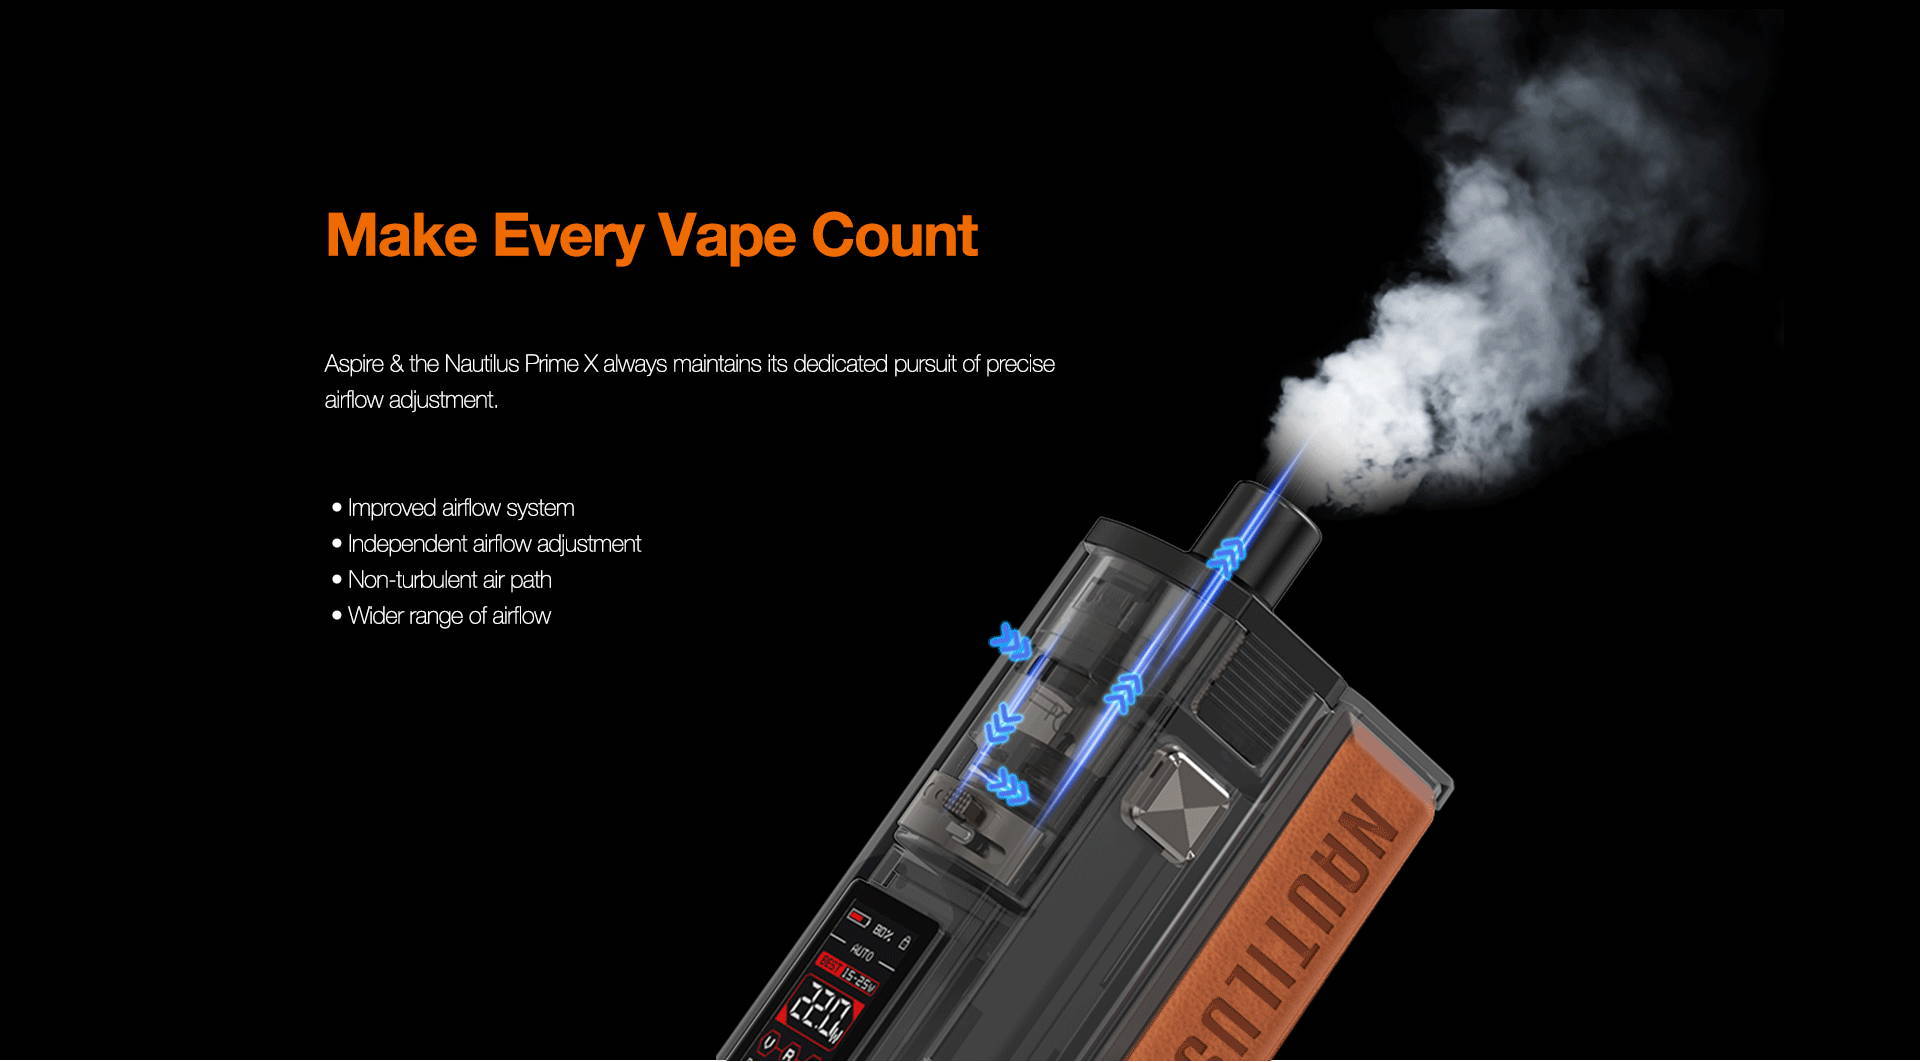 Make Every Puff Count  Nautilus Prime X always maintains its dedicated pursuit of precise airflow adjustment.       External airflow system     Independent airflow channel     Smoother air path     Wider range of airflow     More precise airflow adjustment